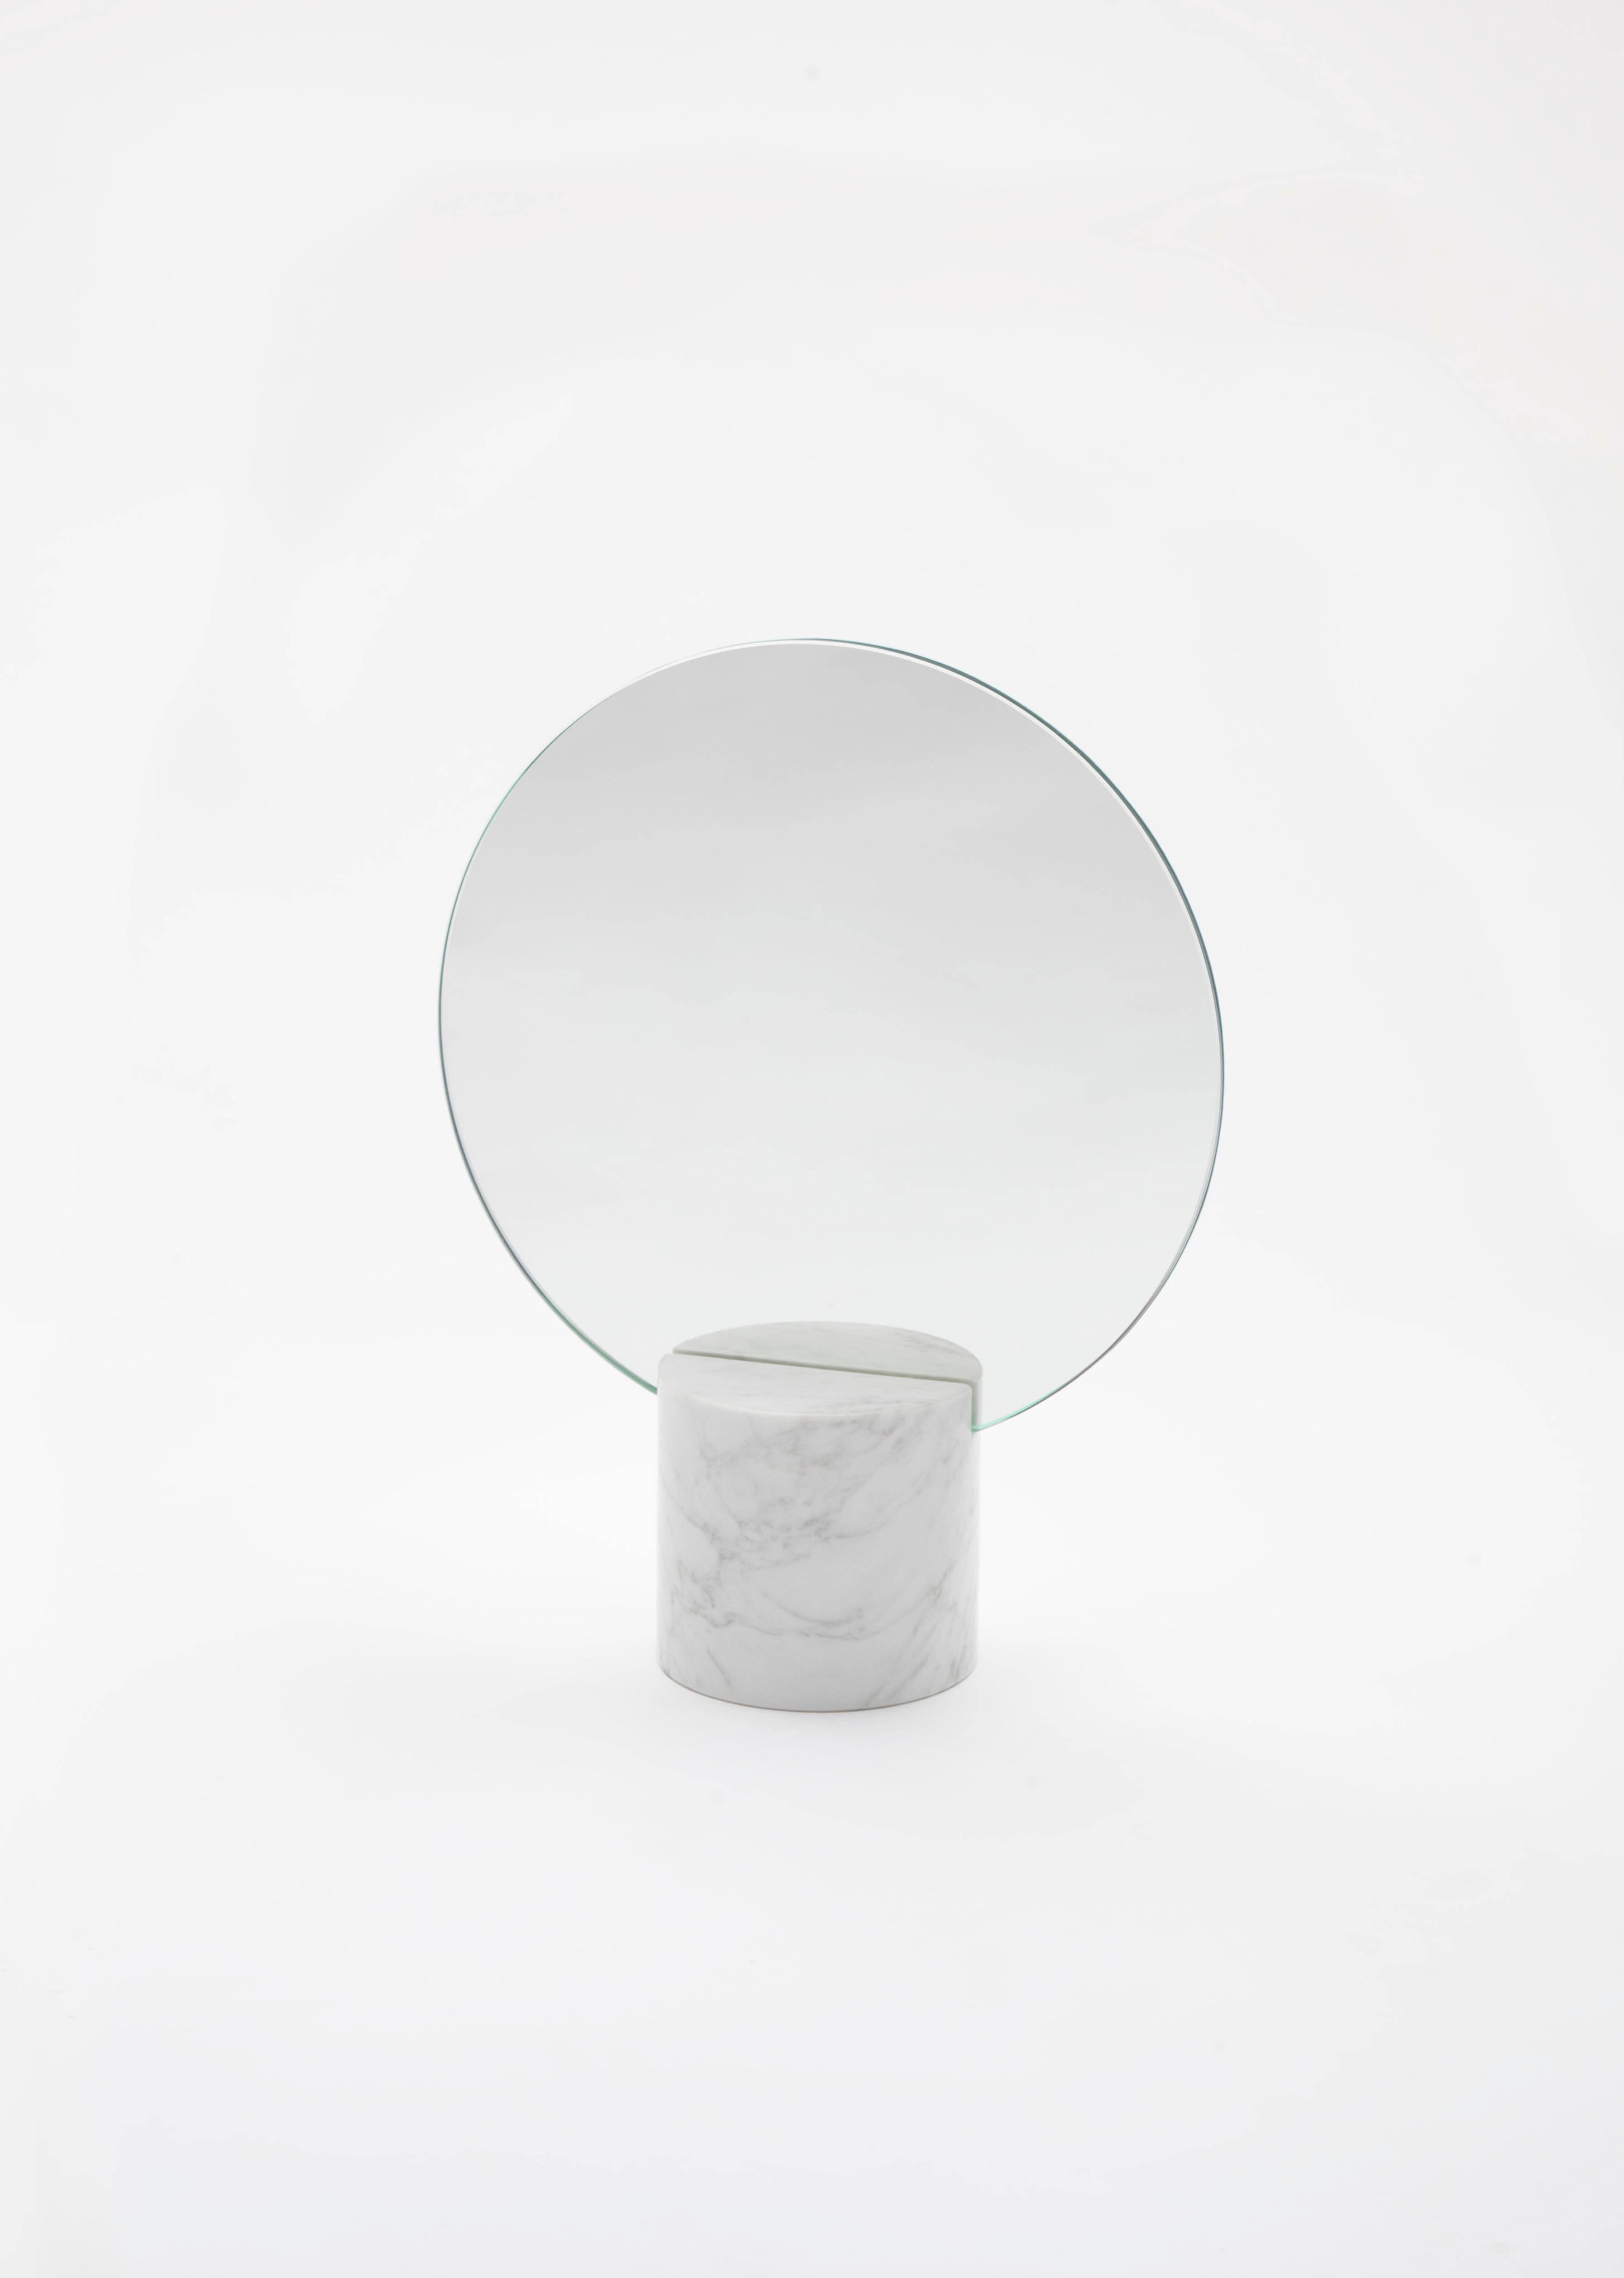 Sun marble mirror by Joseph Vila Capdevila
Material: Carrara marble, brass, mirror
Dimensions: 30 x 38 x 12 cm
Weight: 4.7 kg

Luxurious mirror in two separated parts: the base, made with premium Carrara marble, and mirror, that can be placed